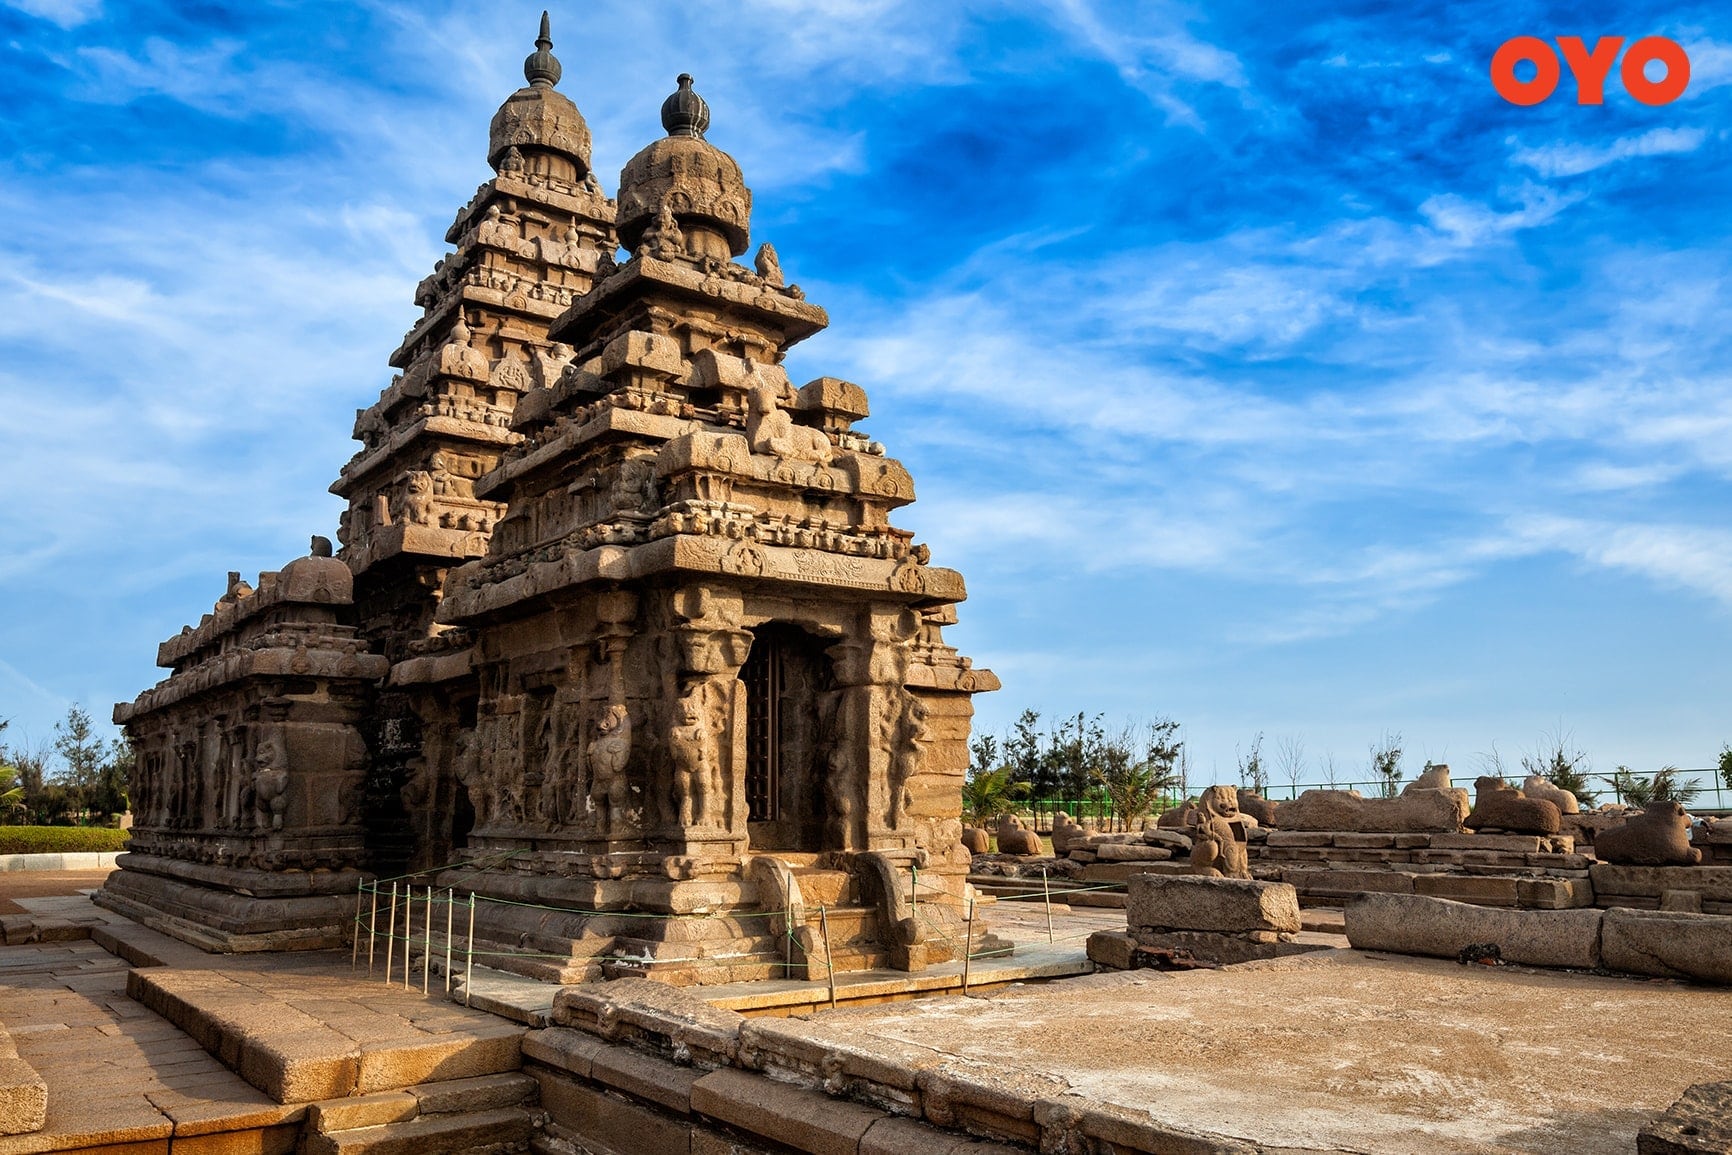 Mahabalipuram, Tamil Nadu - one of the most famous historical monuments in India